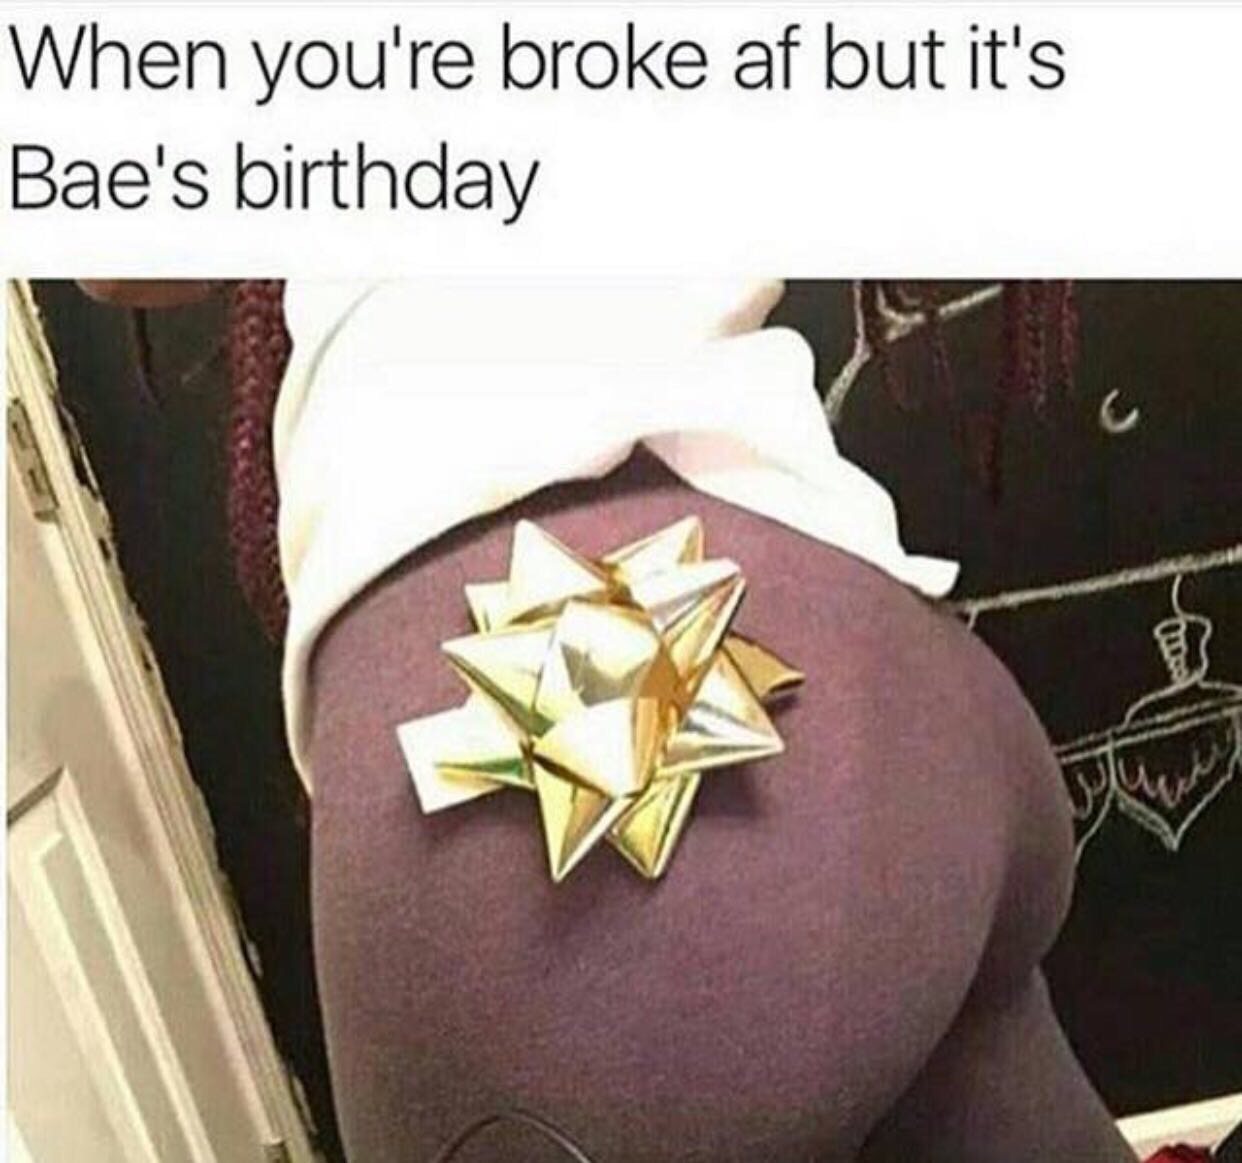 you re broke but it's bae's birthday - When you're broke af but it's Bae's birthday